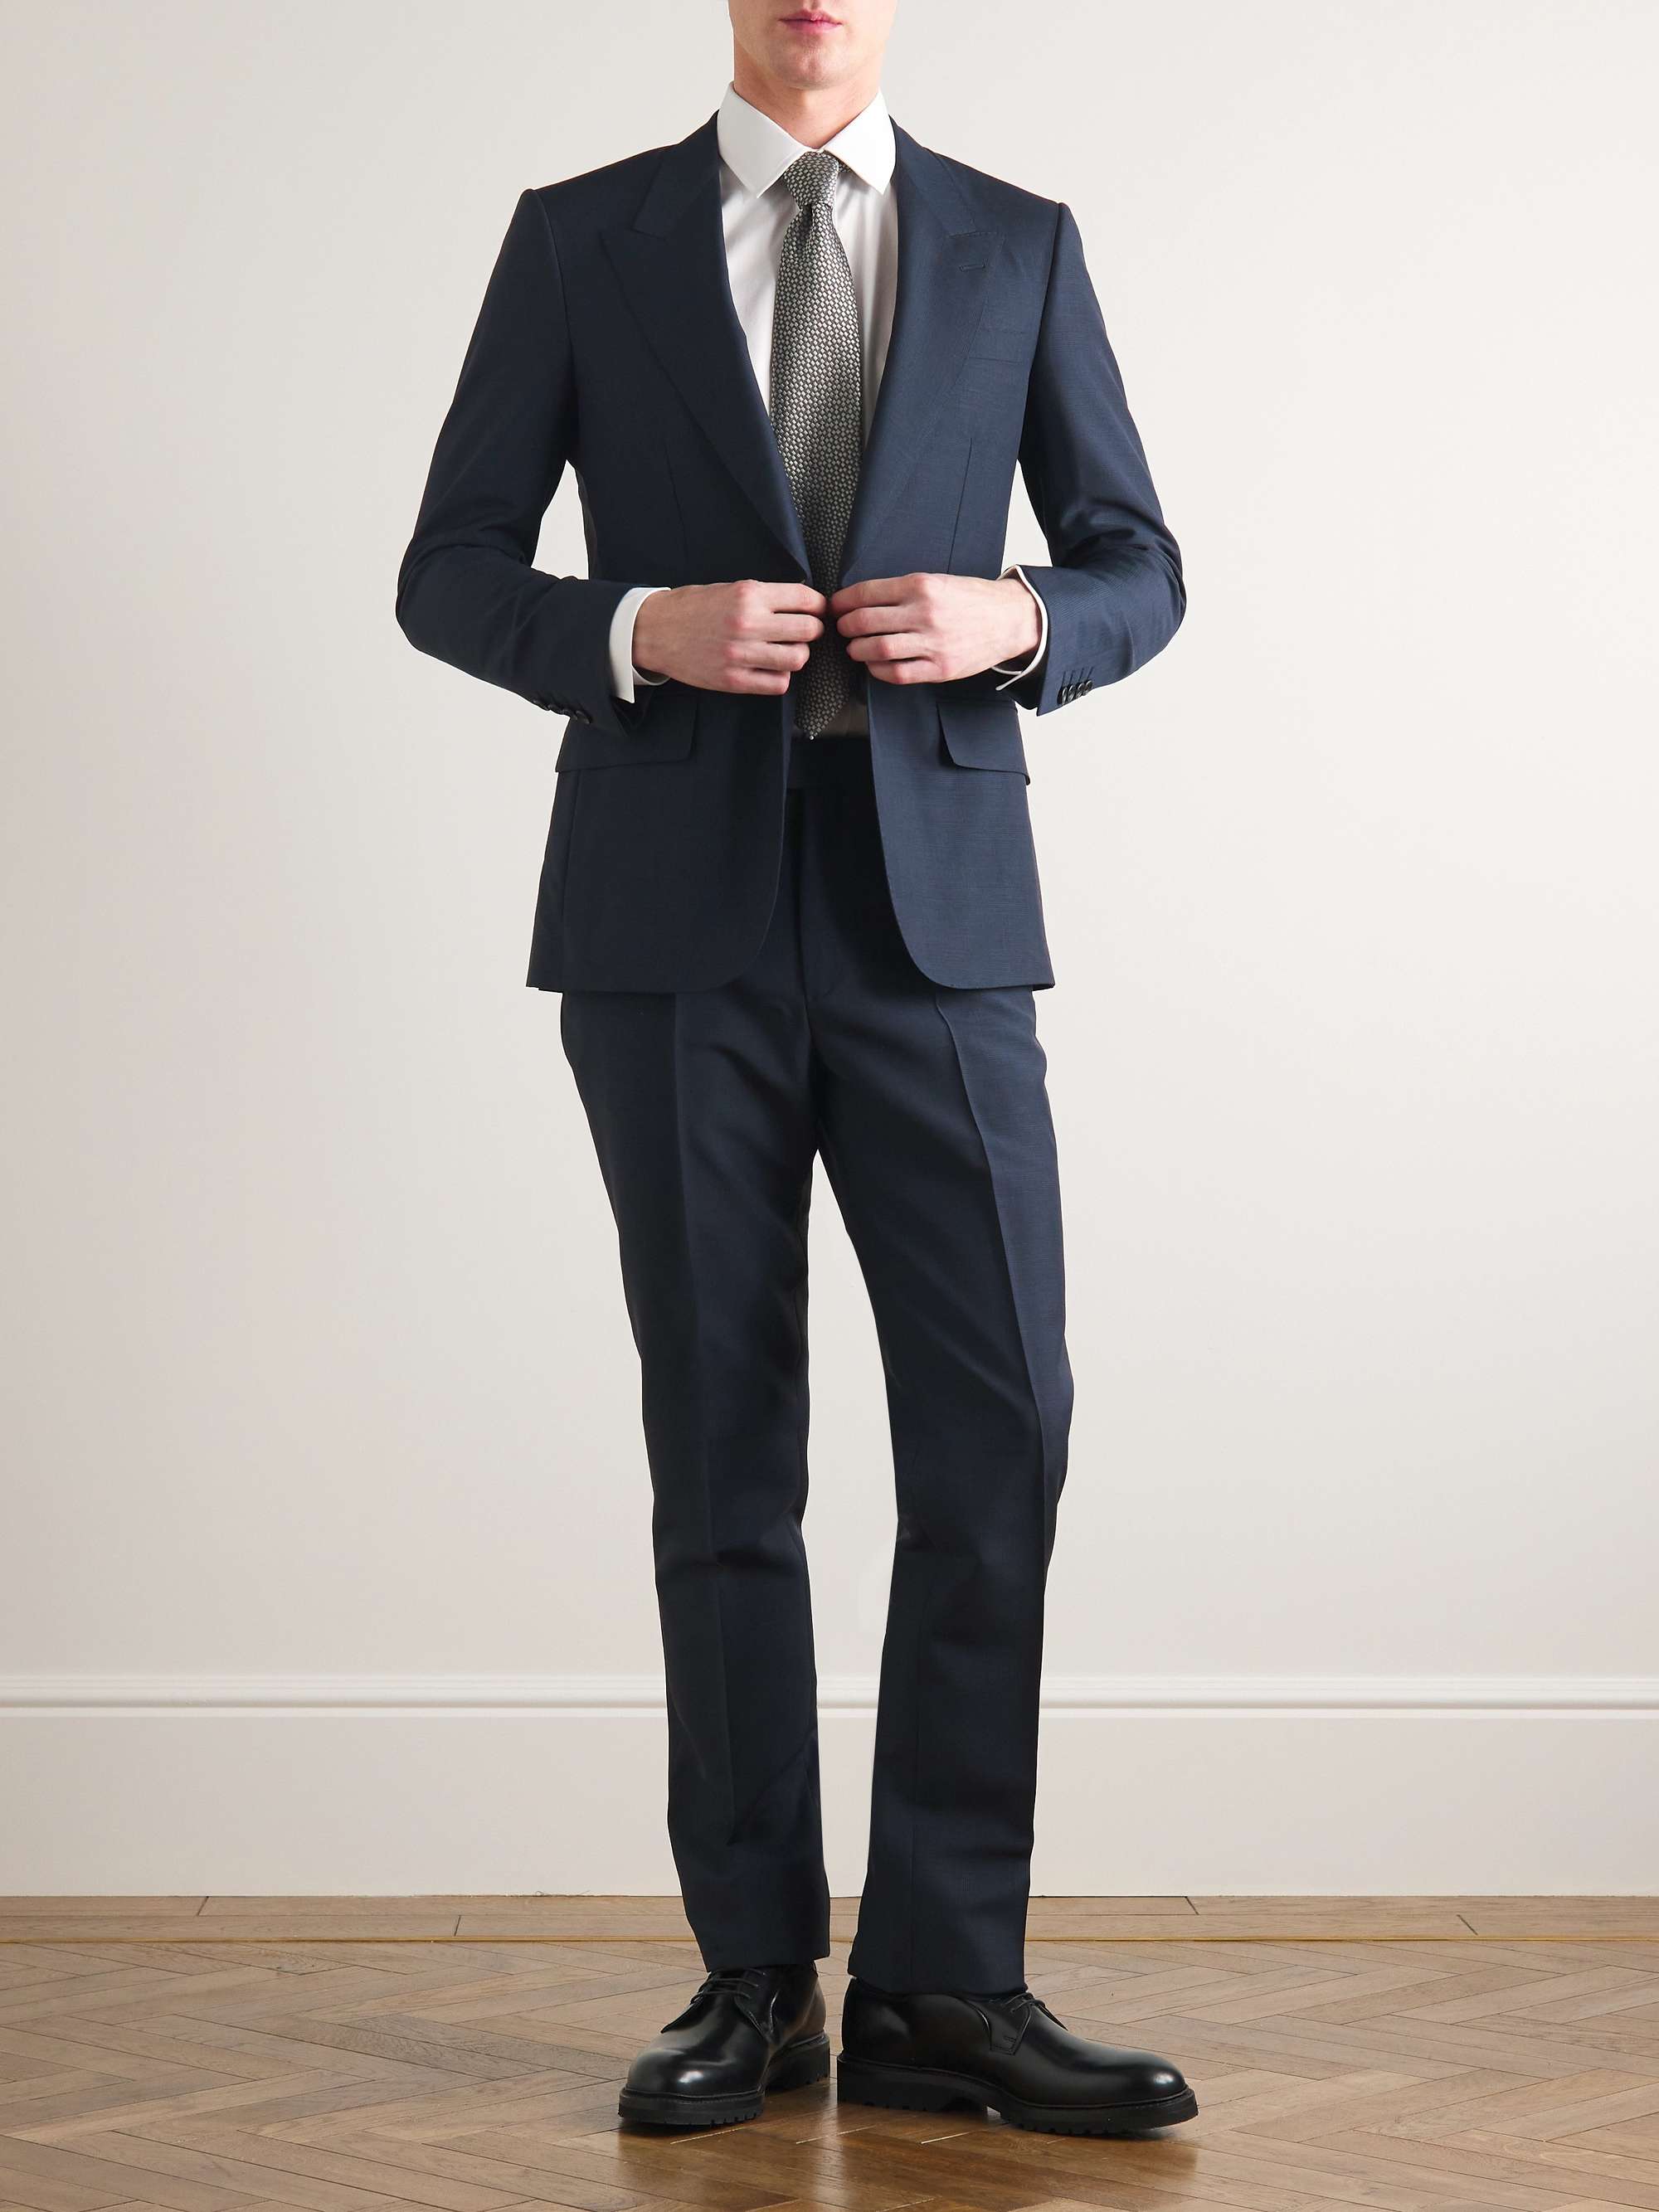 KINGSMAN Straight-Leg Mohair and Wool-Blend Trousers